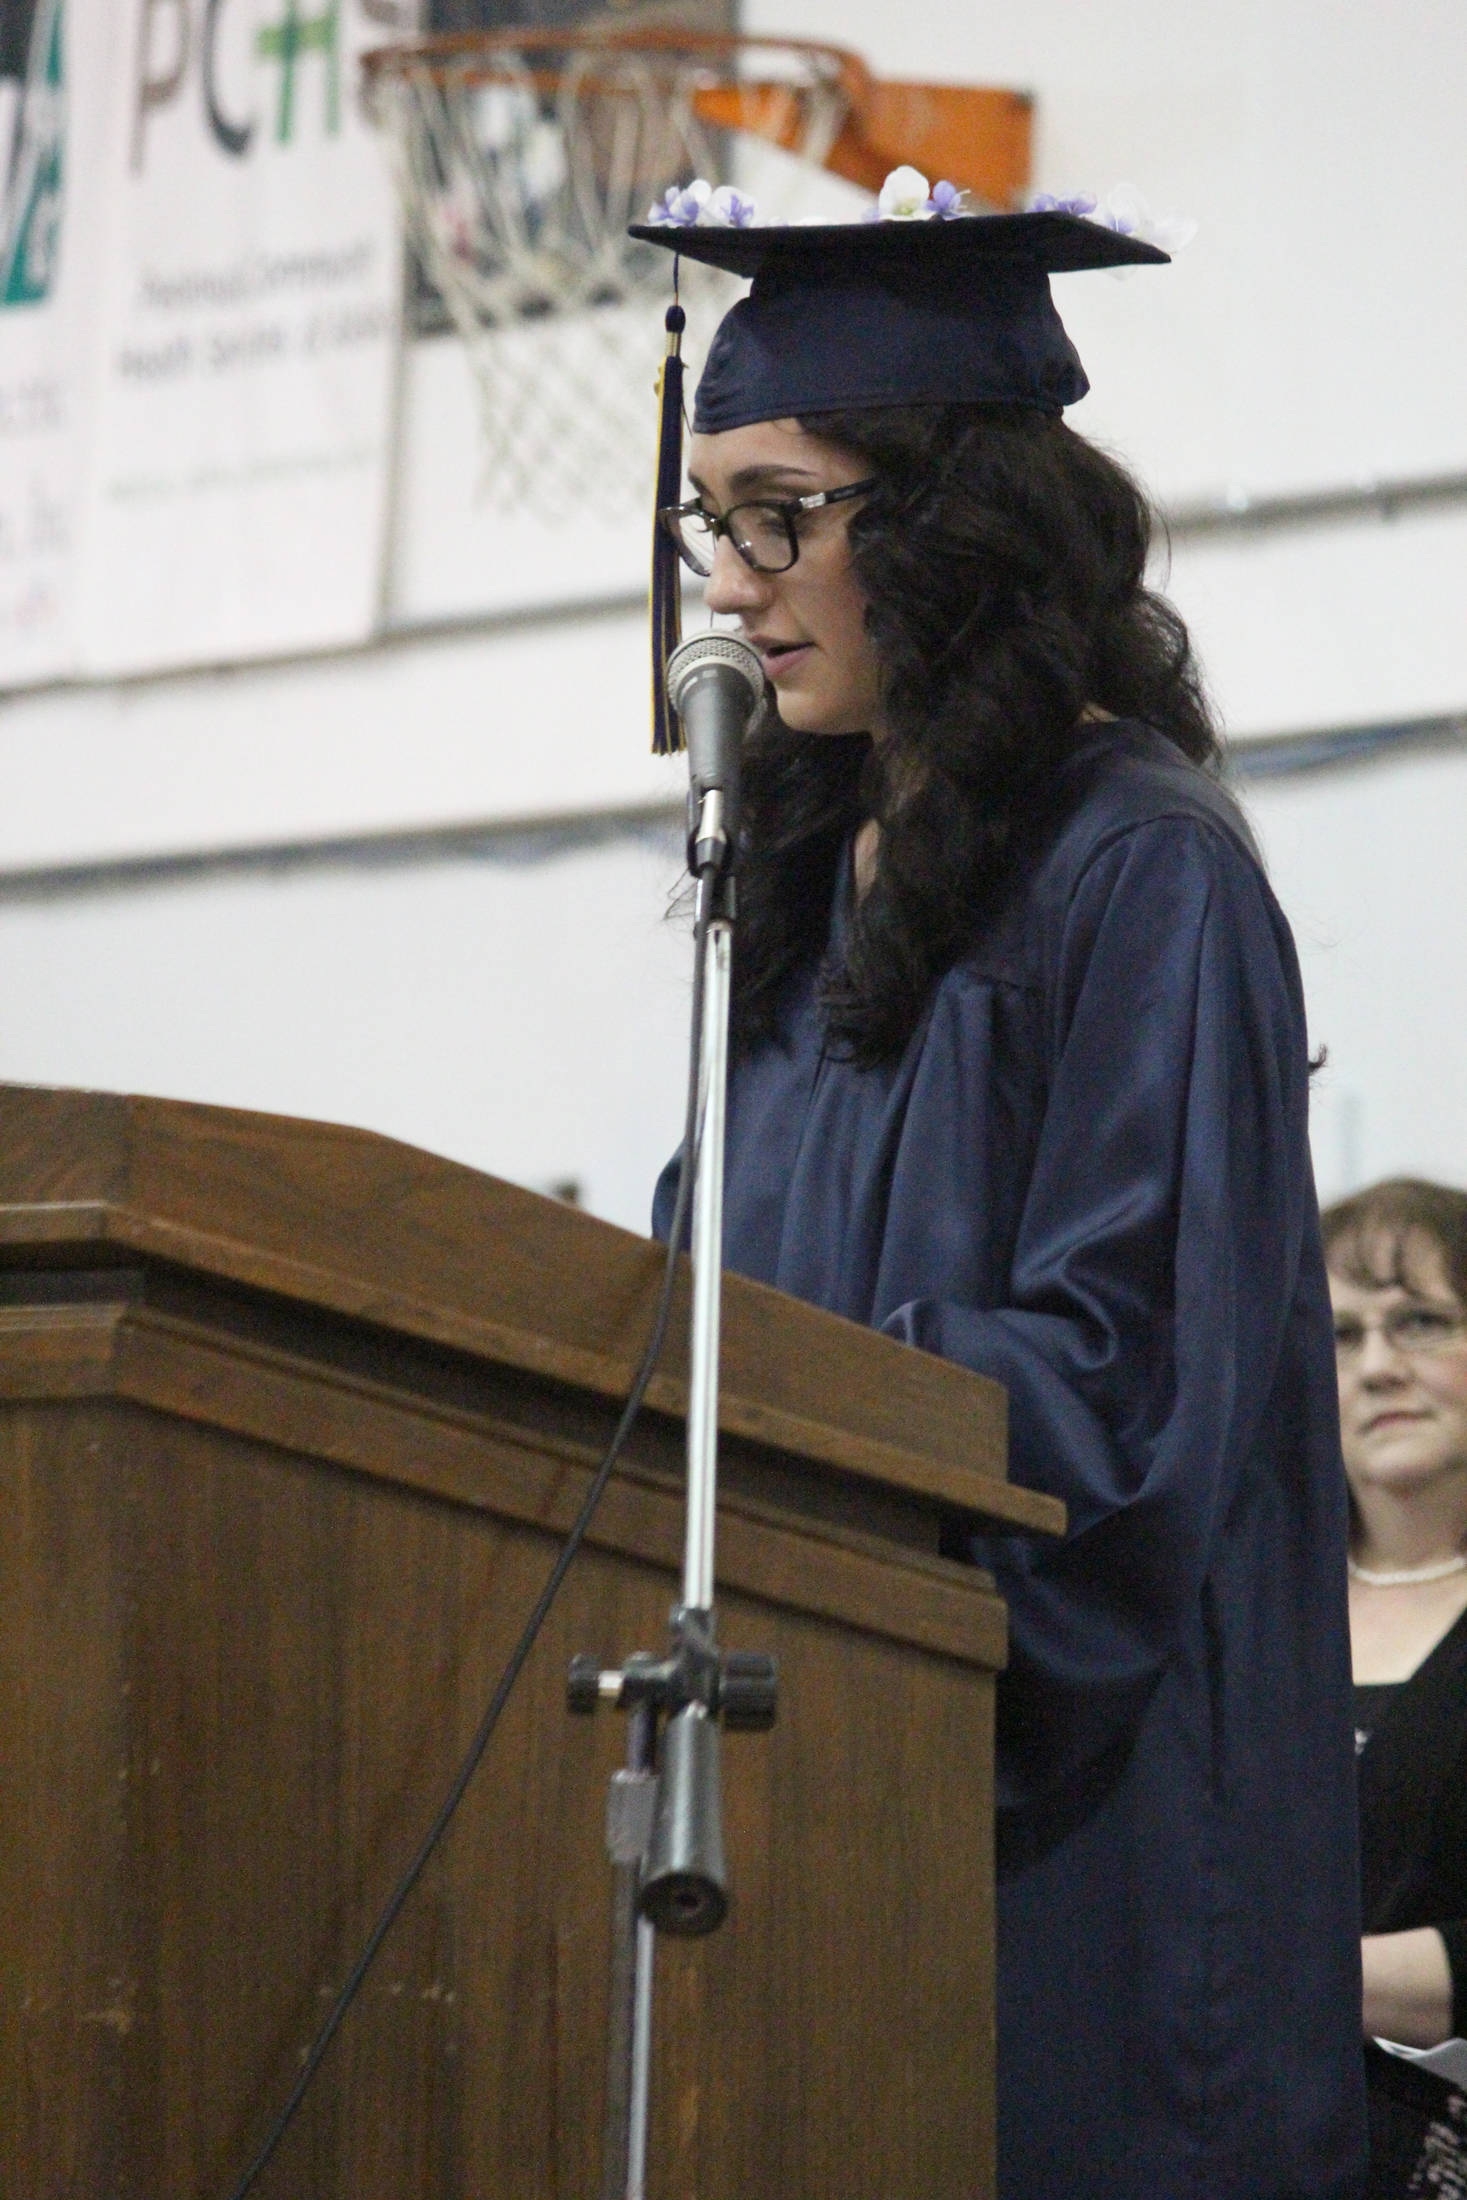 Ninilchik School valedictorian Olivia Delgado delivers her address to her six other classmates and the crowd at their graduation ceremony Monday, May 21, 2018 at the school in Ninilchik, Alaska. (Photo by Megan Pacer/Homer News)